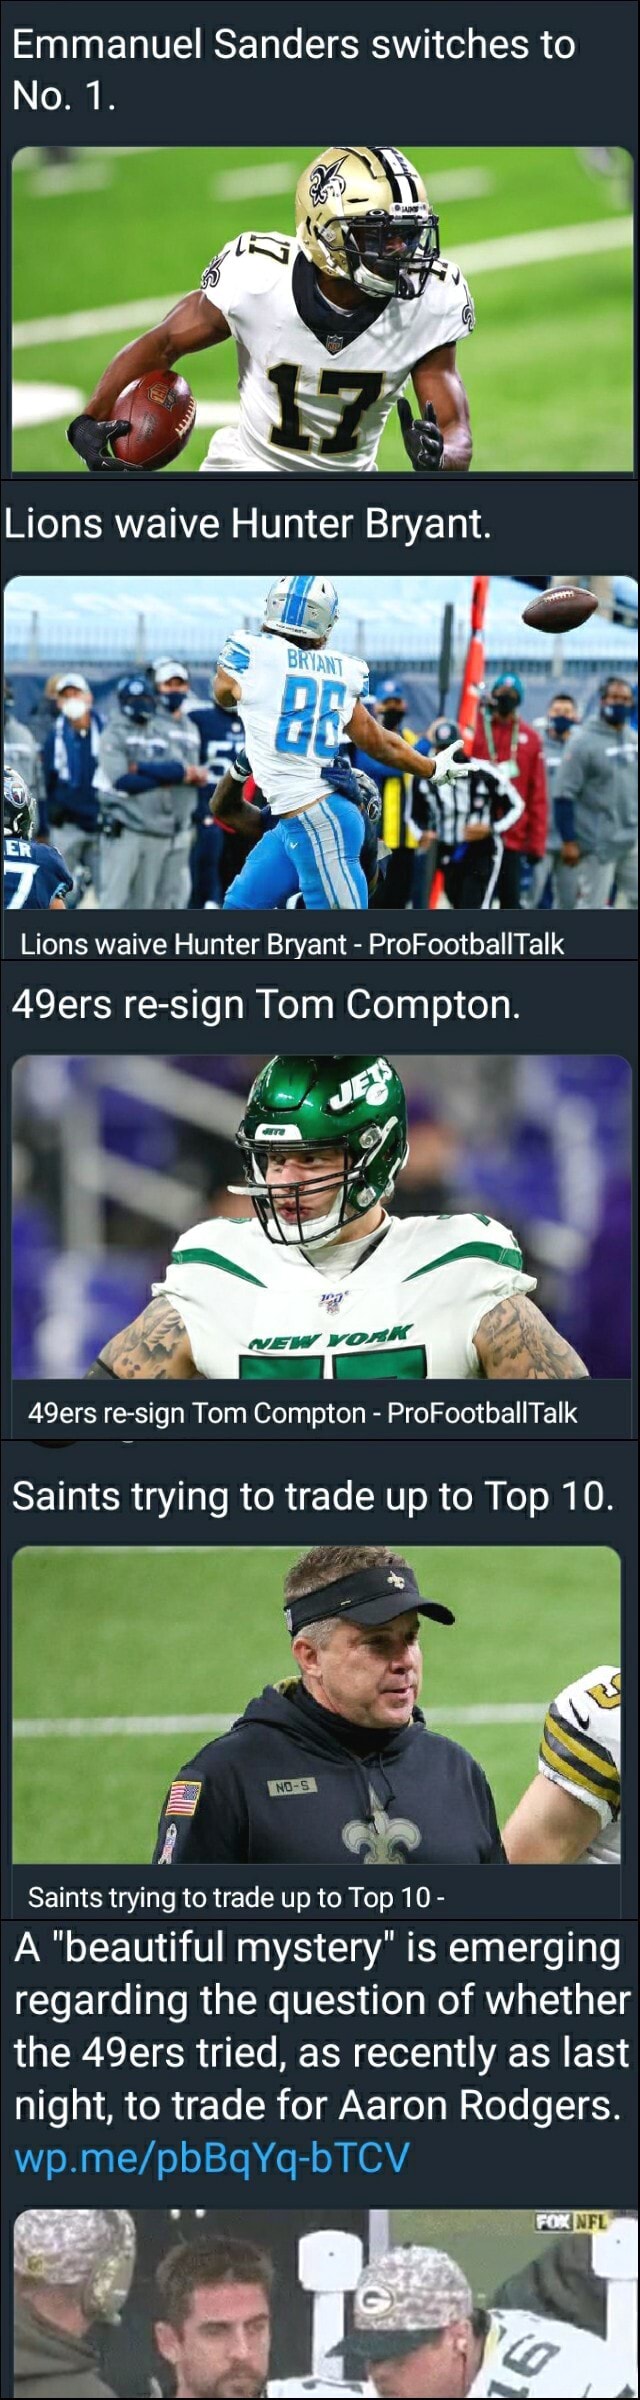 Emmanuel Sanders switches to No. 1. Weer Lions waive Hunter Bryant. Lions  waive Hunter Bryant - ProFootballTalk 49ers re-sign Tom Compton. we A9ers  re-sign Tom Compton - ProFoothallTalk Saints trying to trade